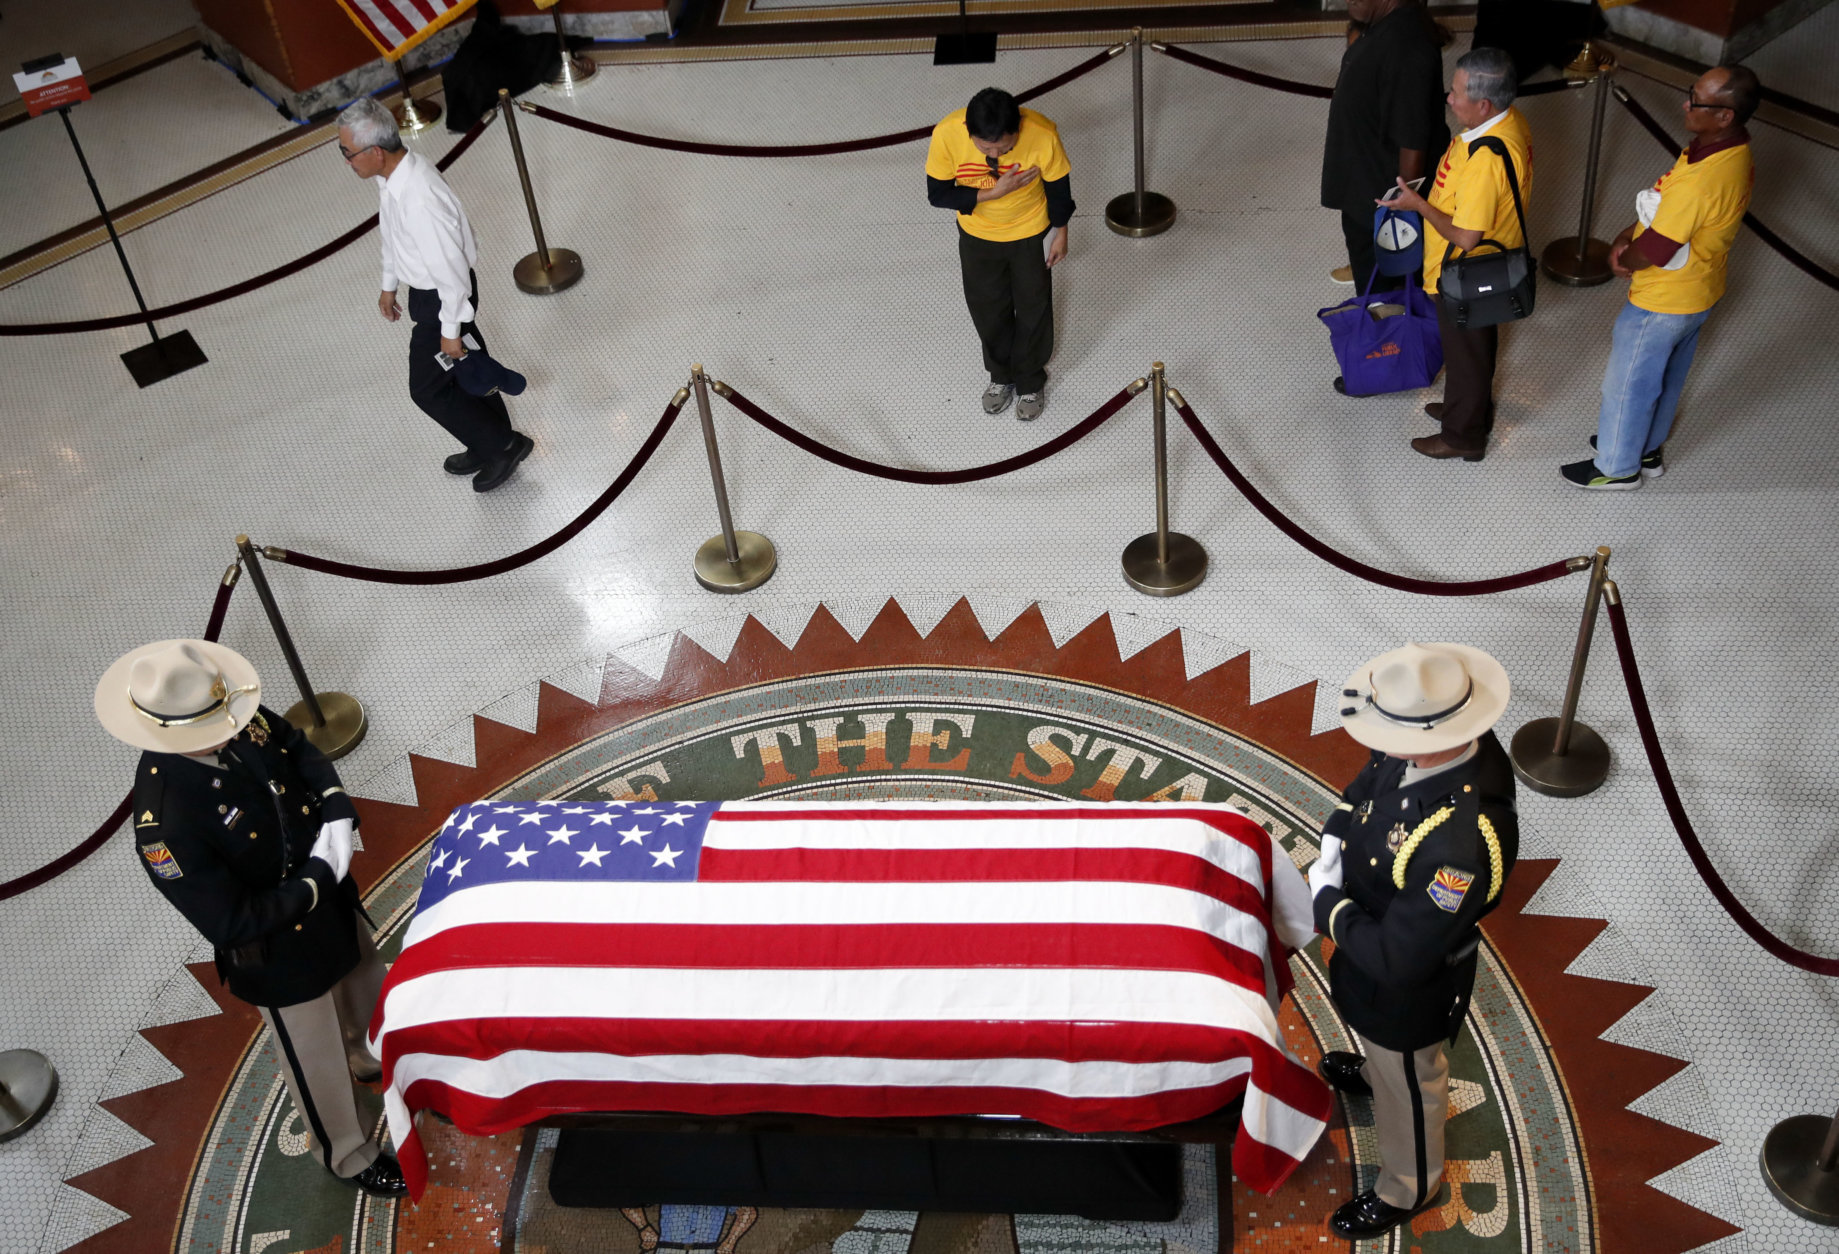 A Vietnamese group from Orange County, Calif., pays their respects near the casket of Sen. John McCain during a viewing at the Arizona Capitol on Wednesday, Aug. 29, 2018, in Phoenix. (AP Photo/Jae C. Hong)